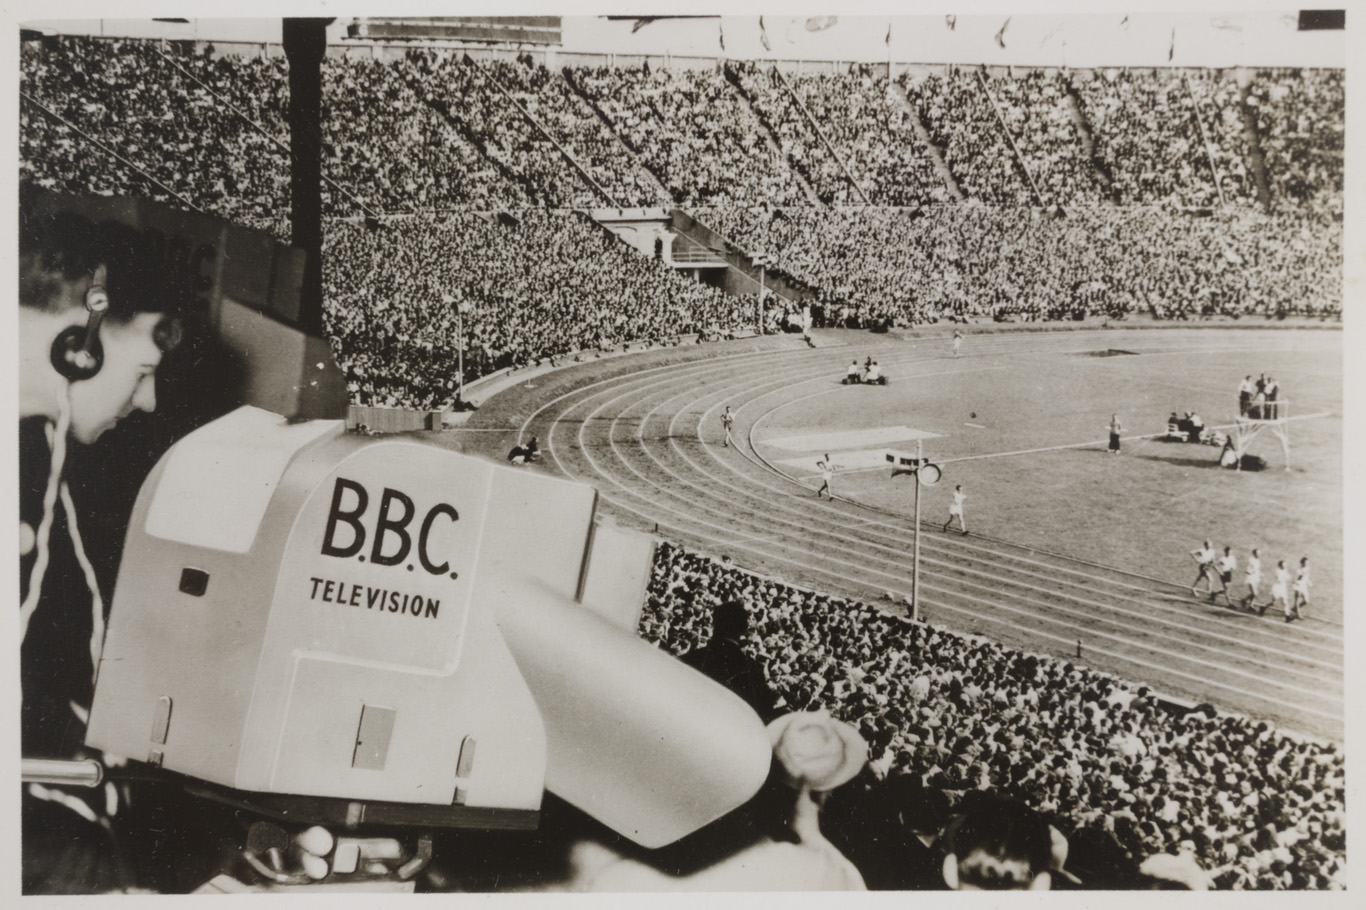 Photograph showing a CPS Emitron camera pointed toward the athletics track during the 1948 Olympics in London